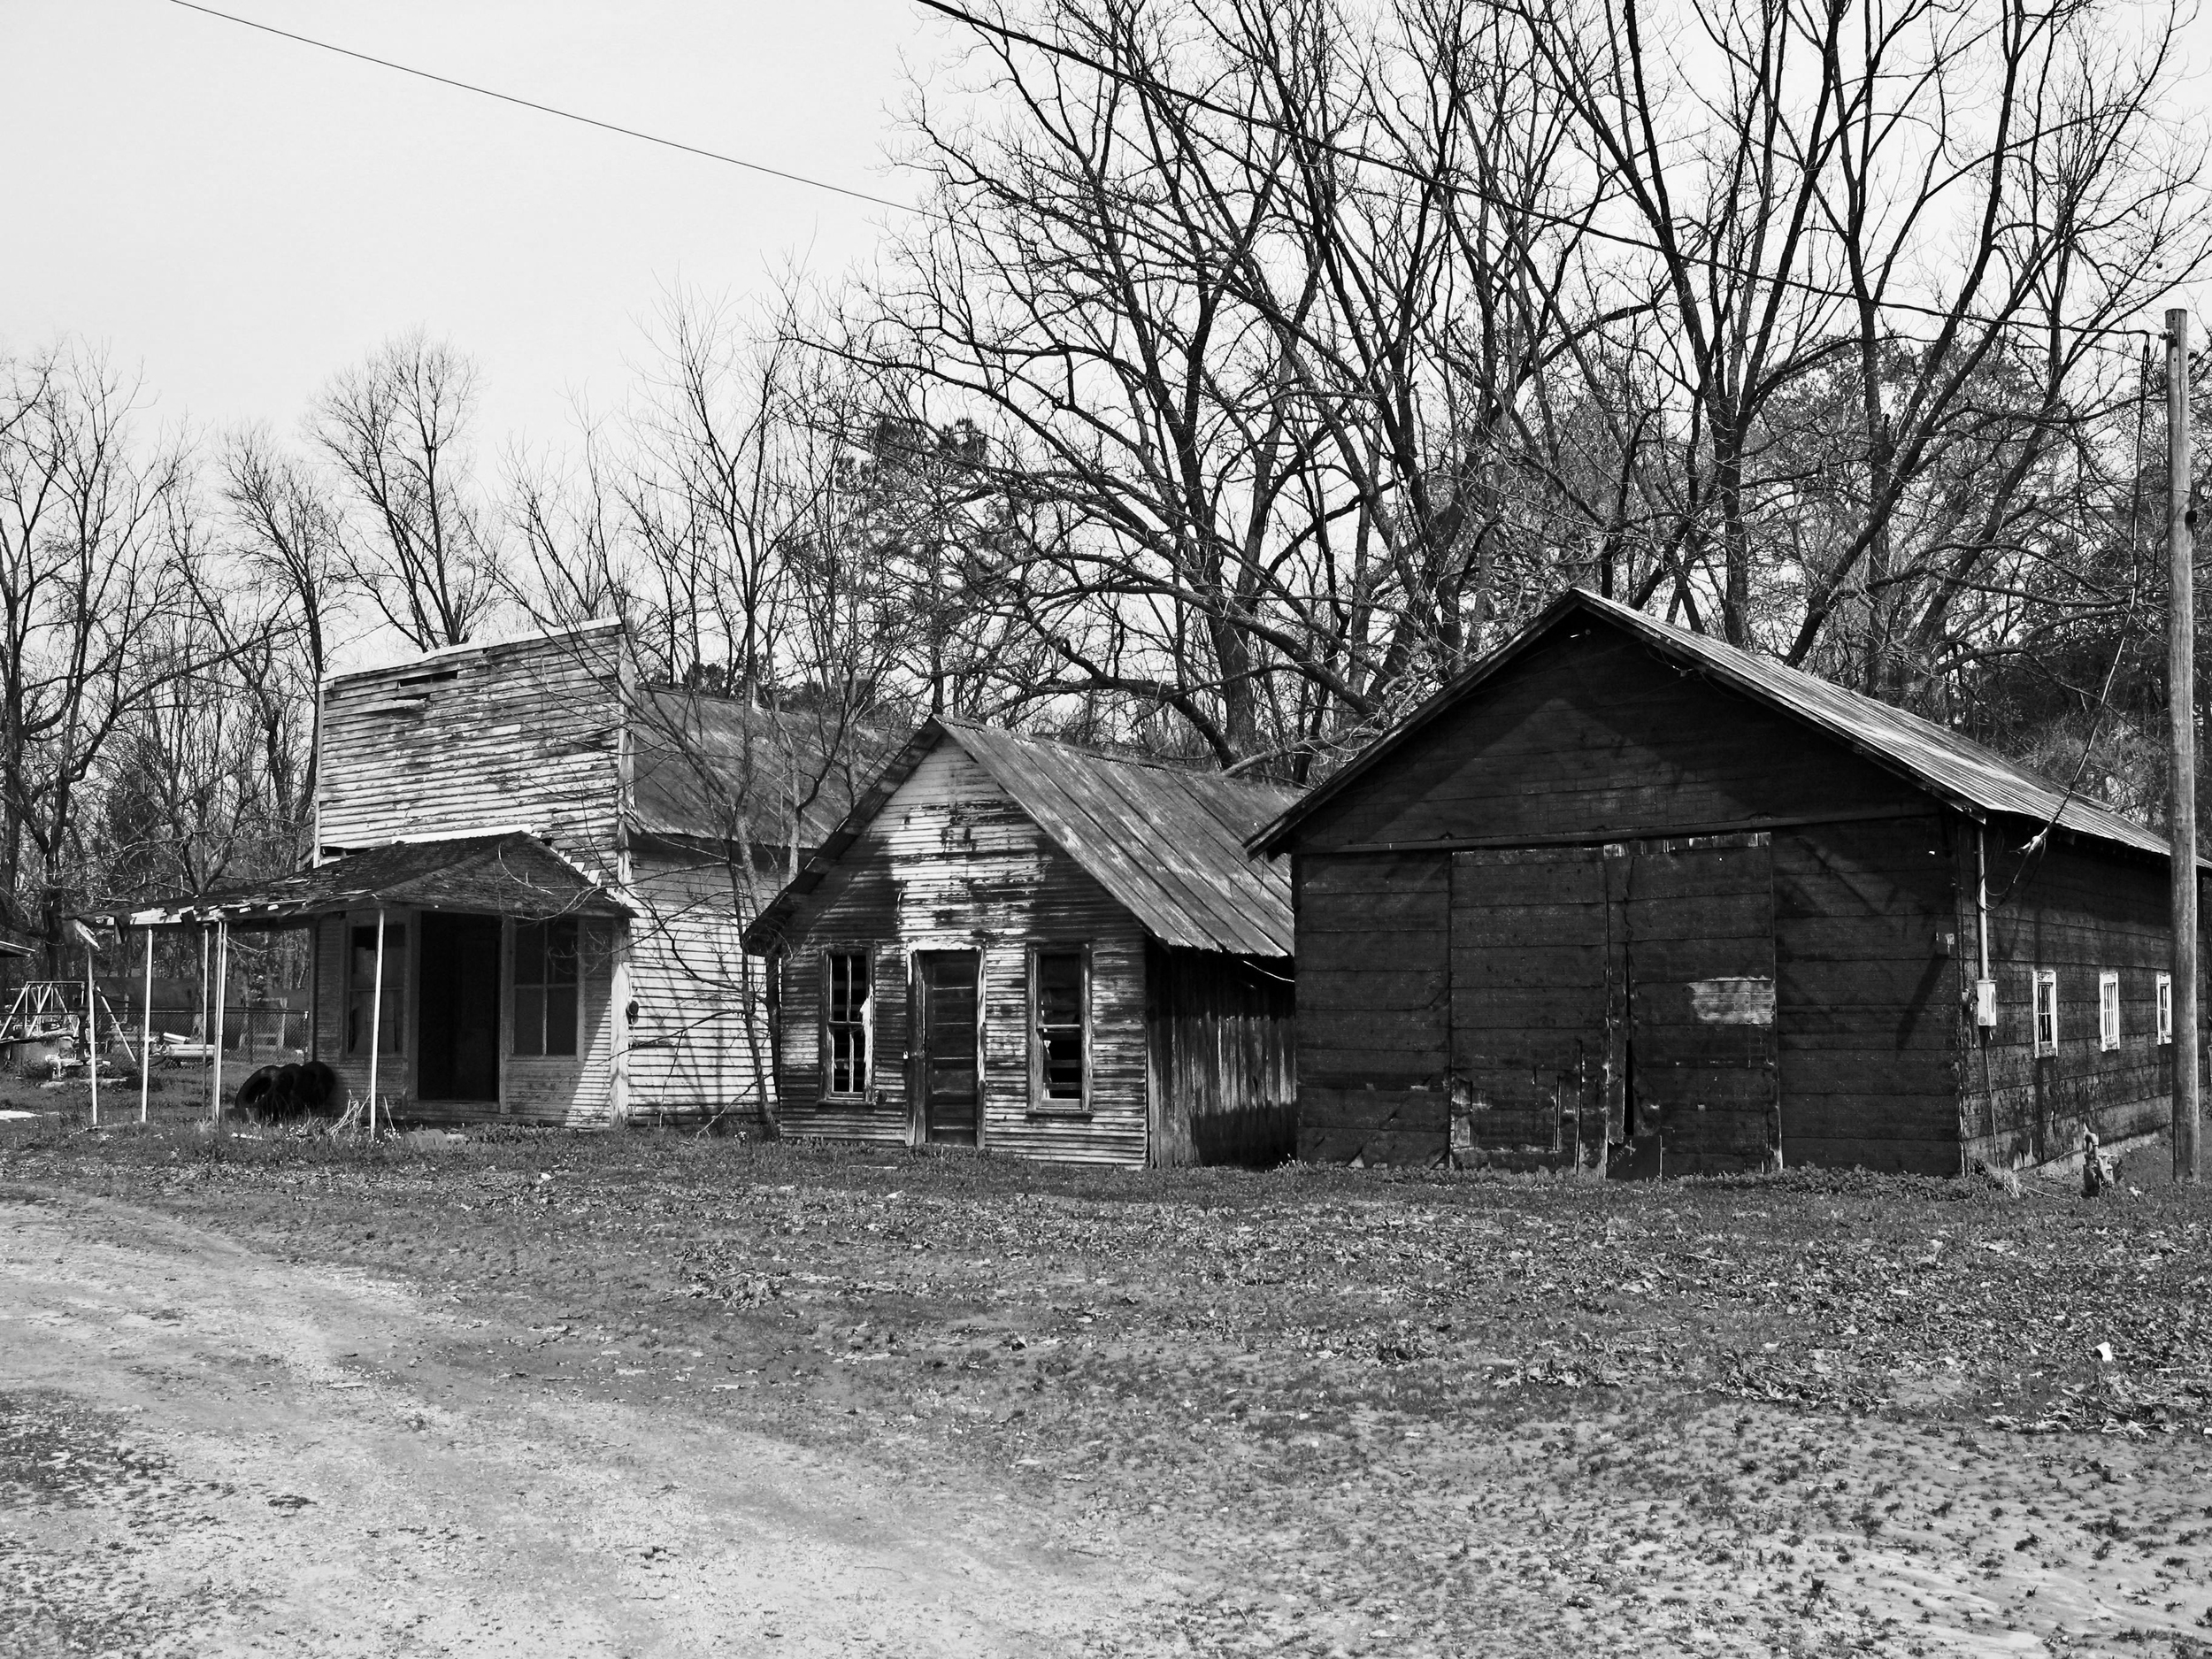    Grocery Store, Post Office and Mechanic Shop  , Healing Springs, AR, 2013. B&amp;W HDR digital image, inkjet print&nbsp; 